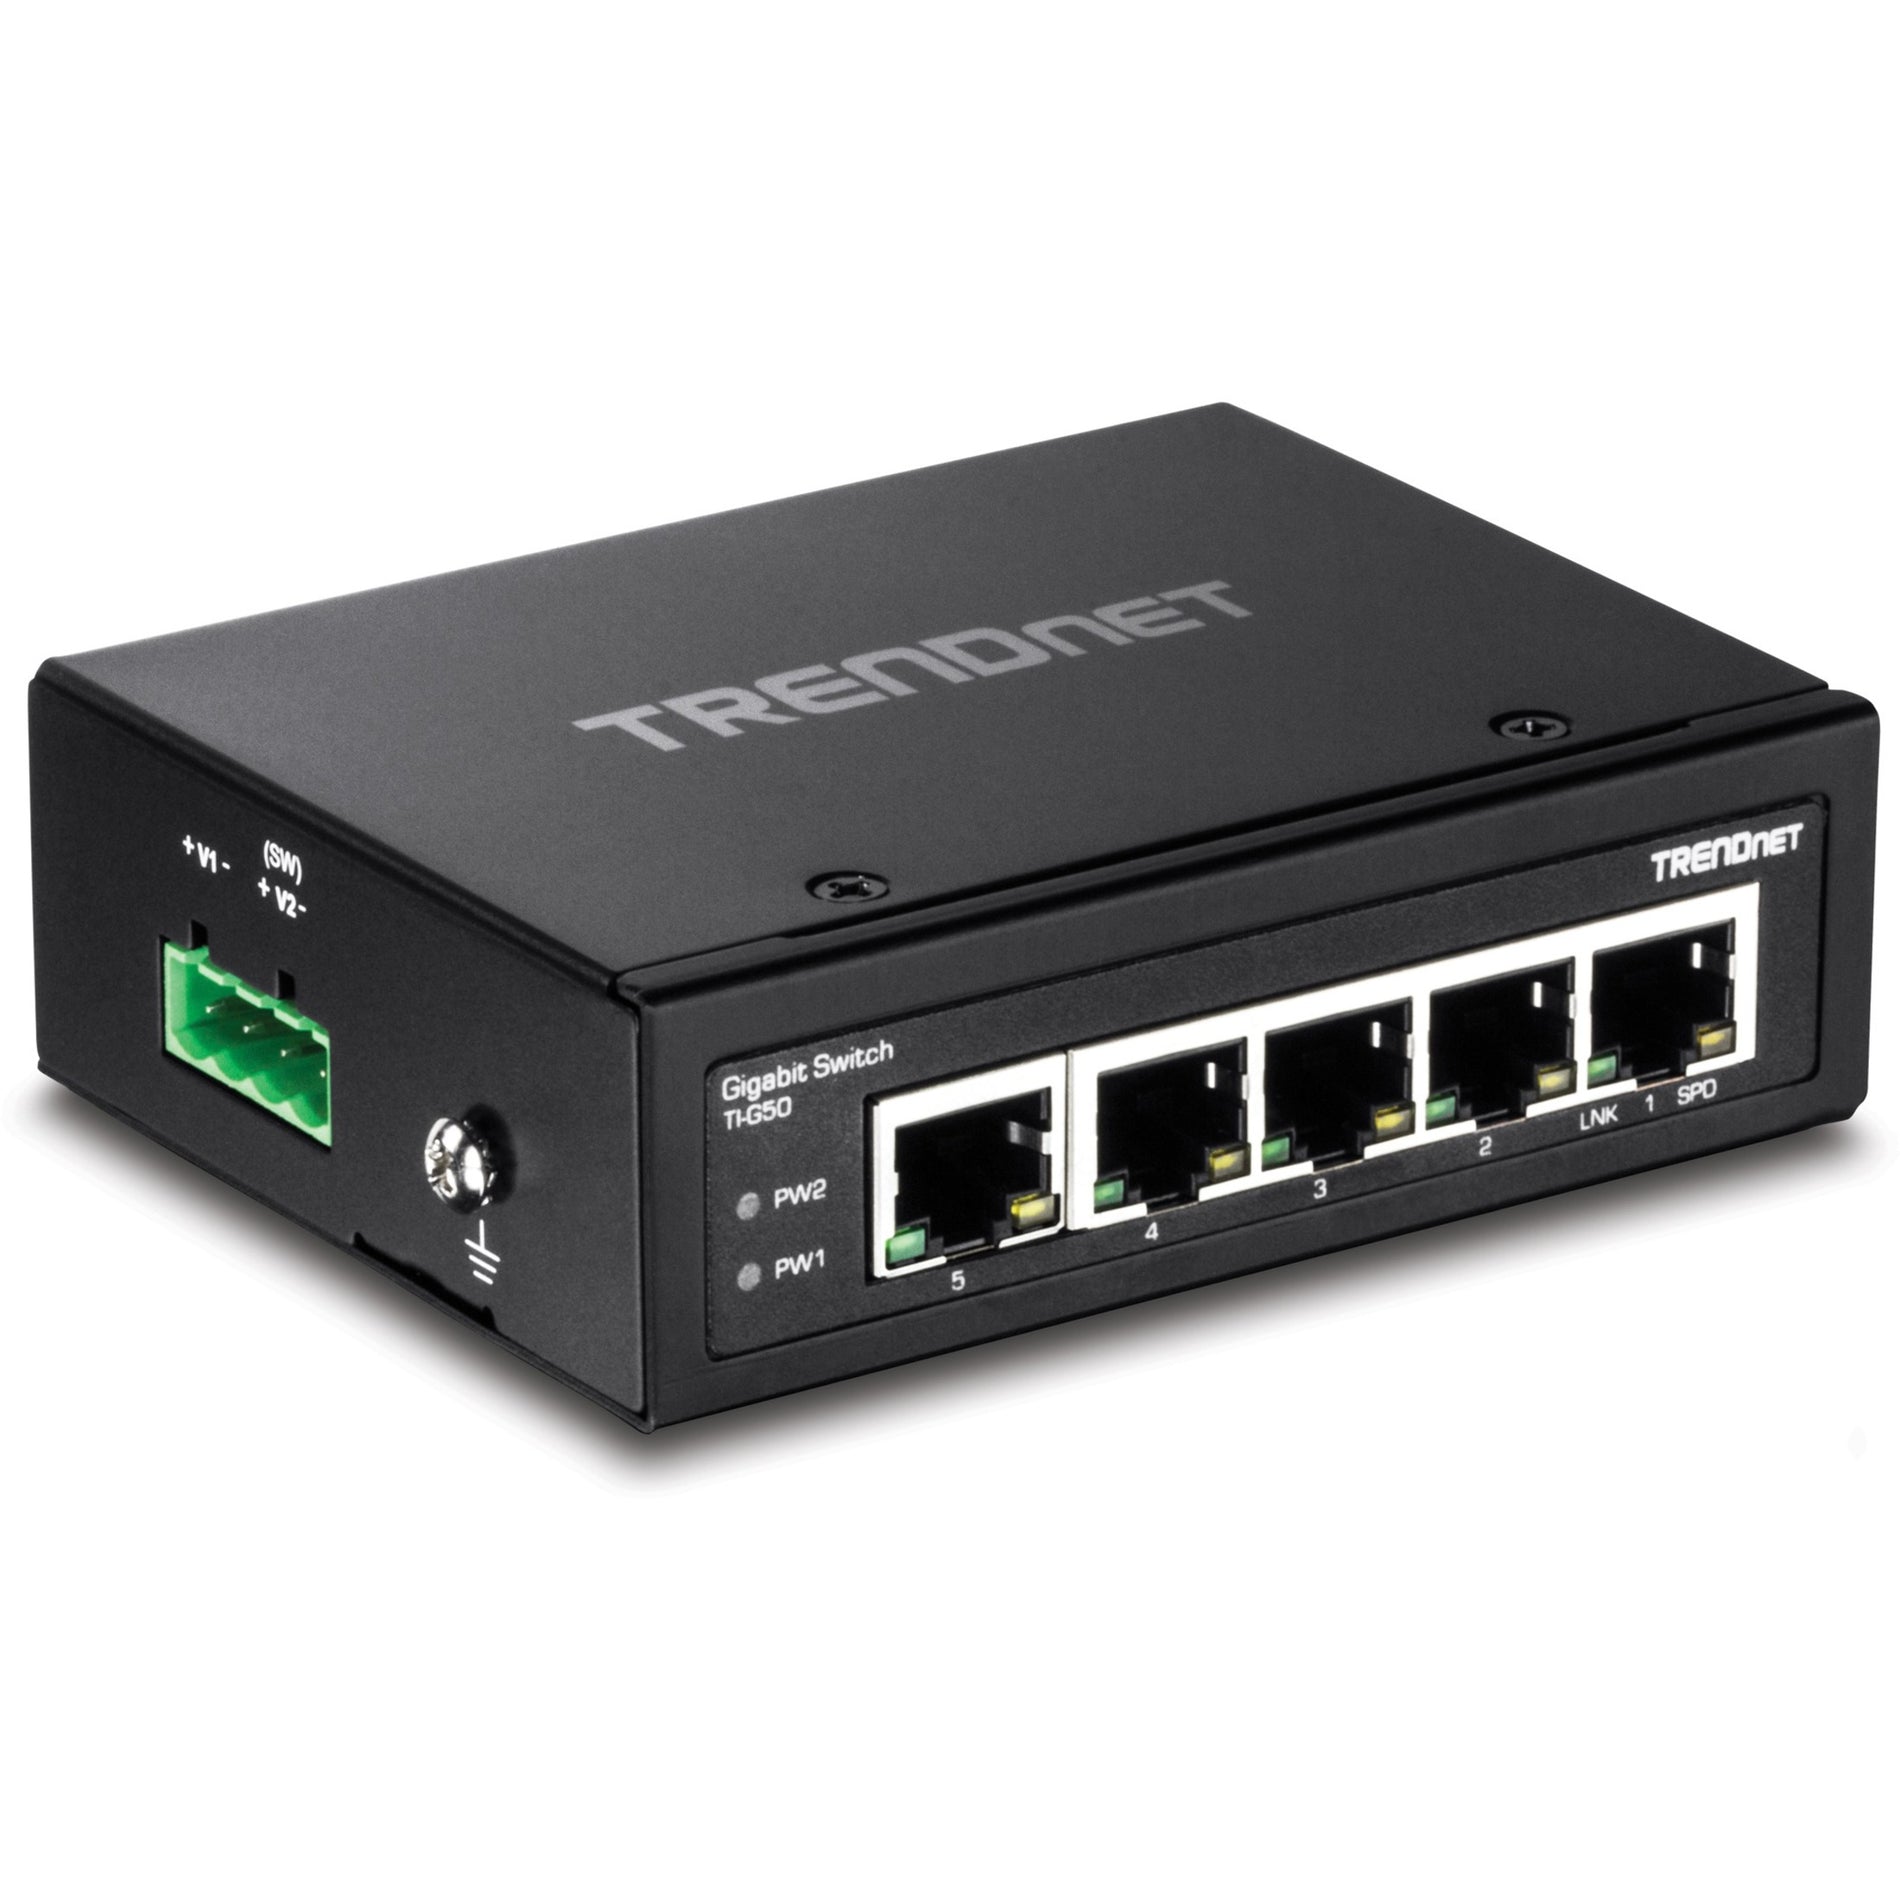 TRENDnet TI-G50 5-port hardened Industrial Gigabit Switch, 10 Gbps Switching Capacity, IP30 Rated Network Switch (-40 to 167 ?F), DIN-Rail & Wall Mounts Included, Lifetime Protection, Black